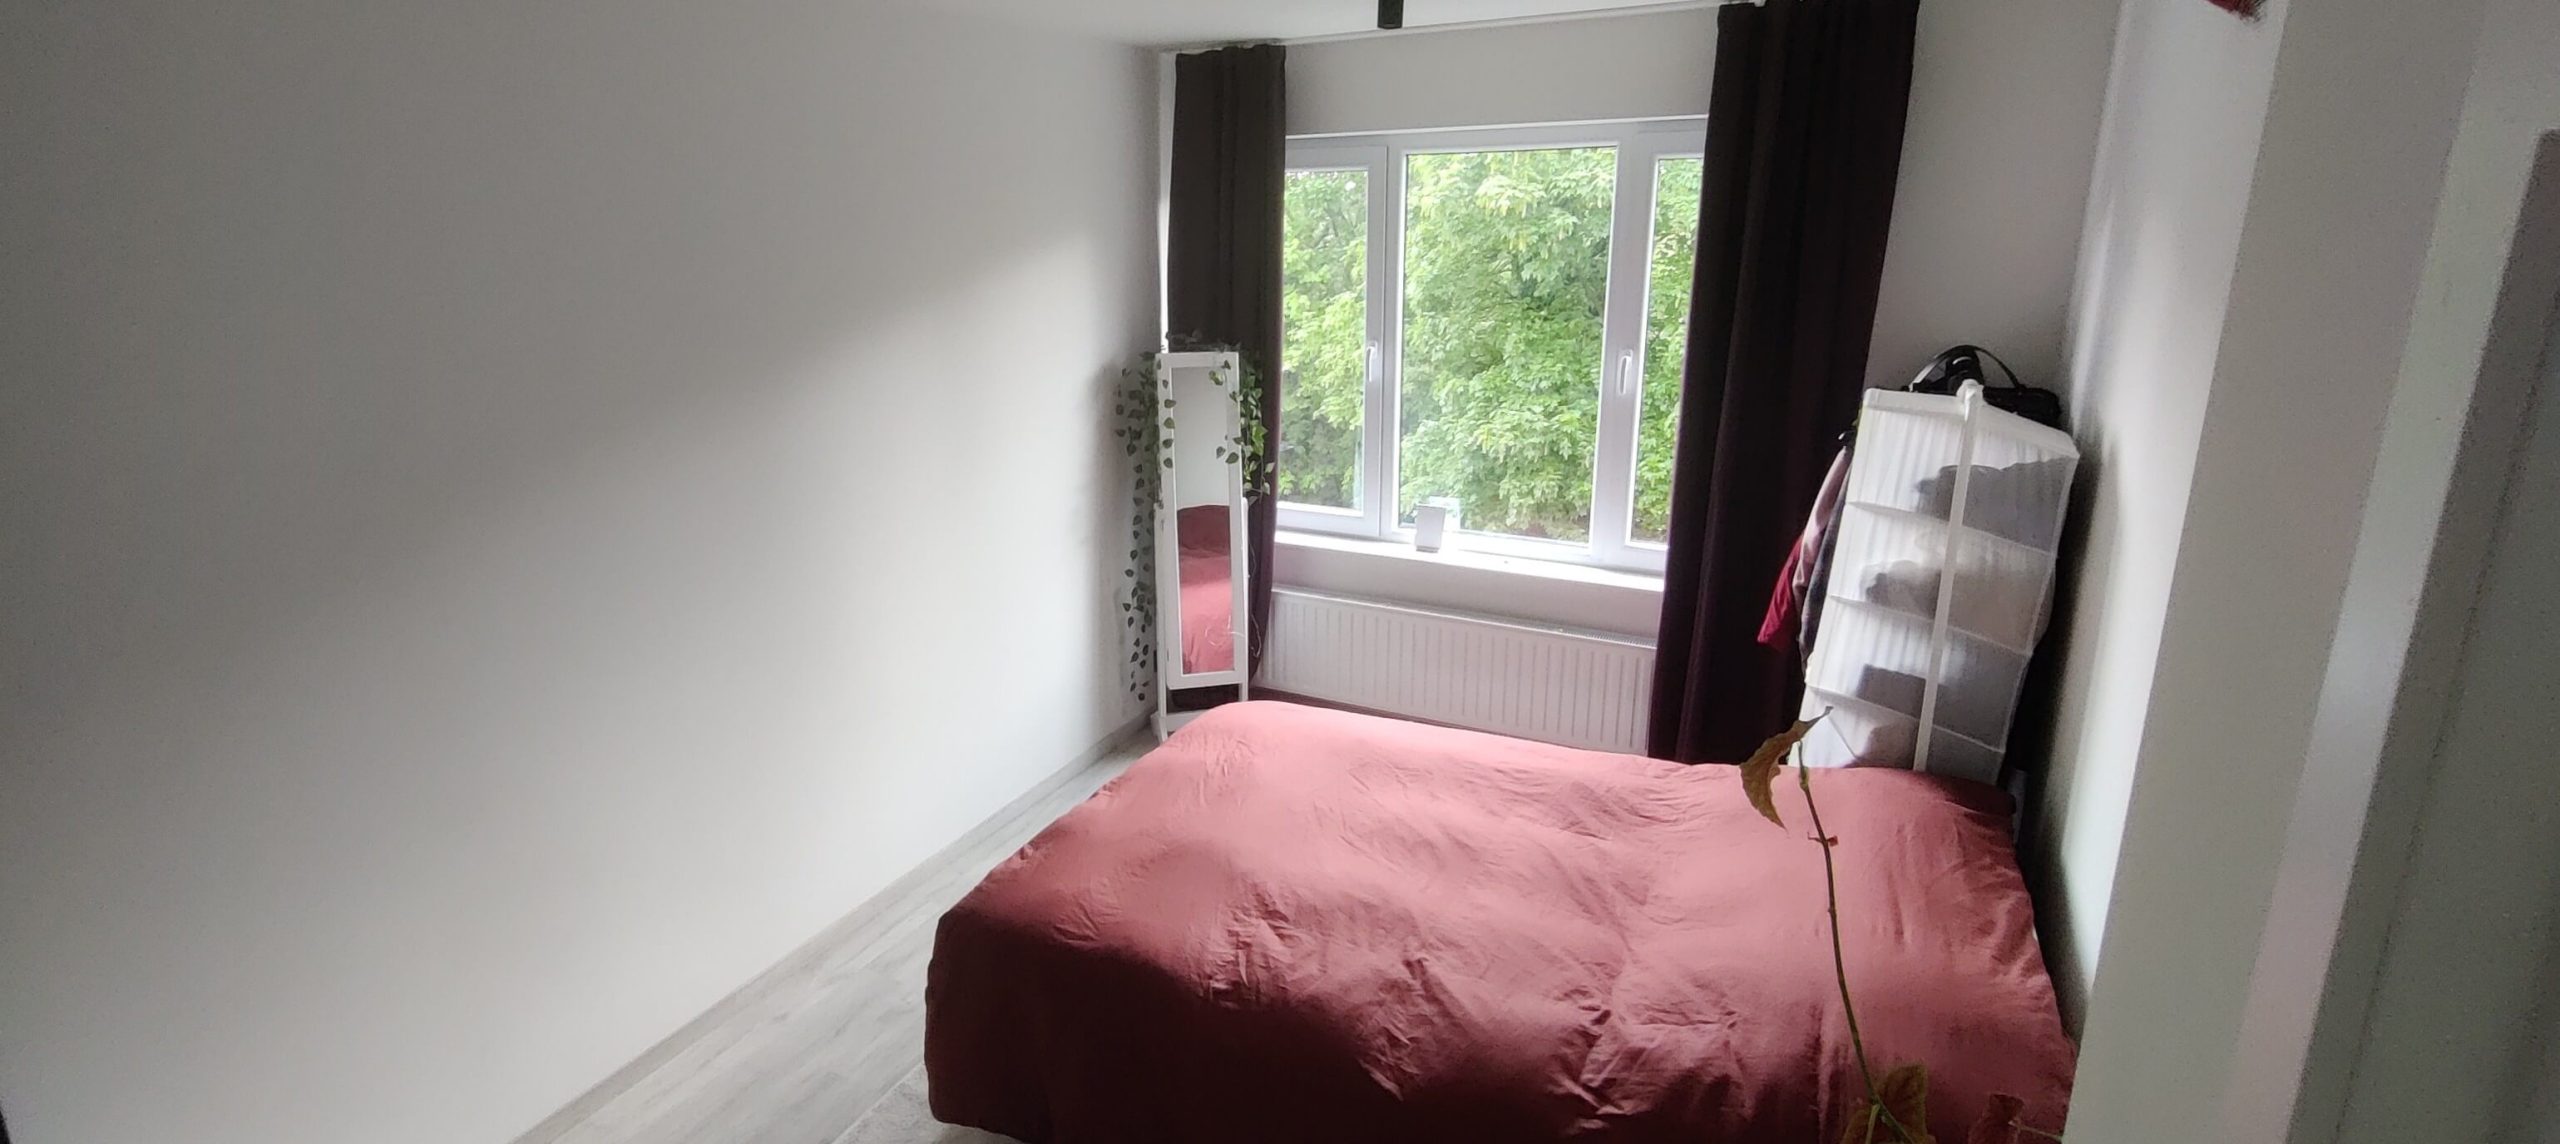 aparment for rent in Ghent - bedroom